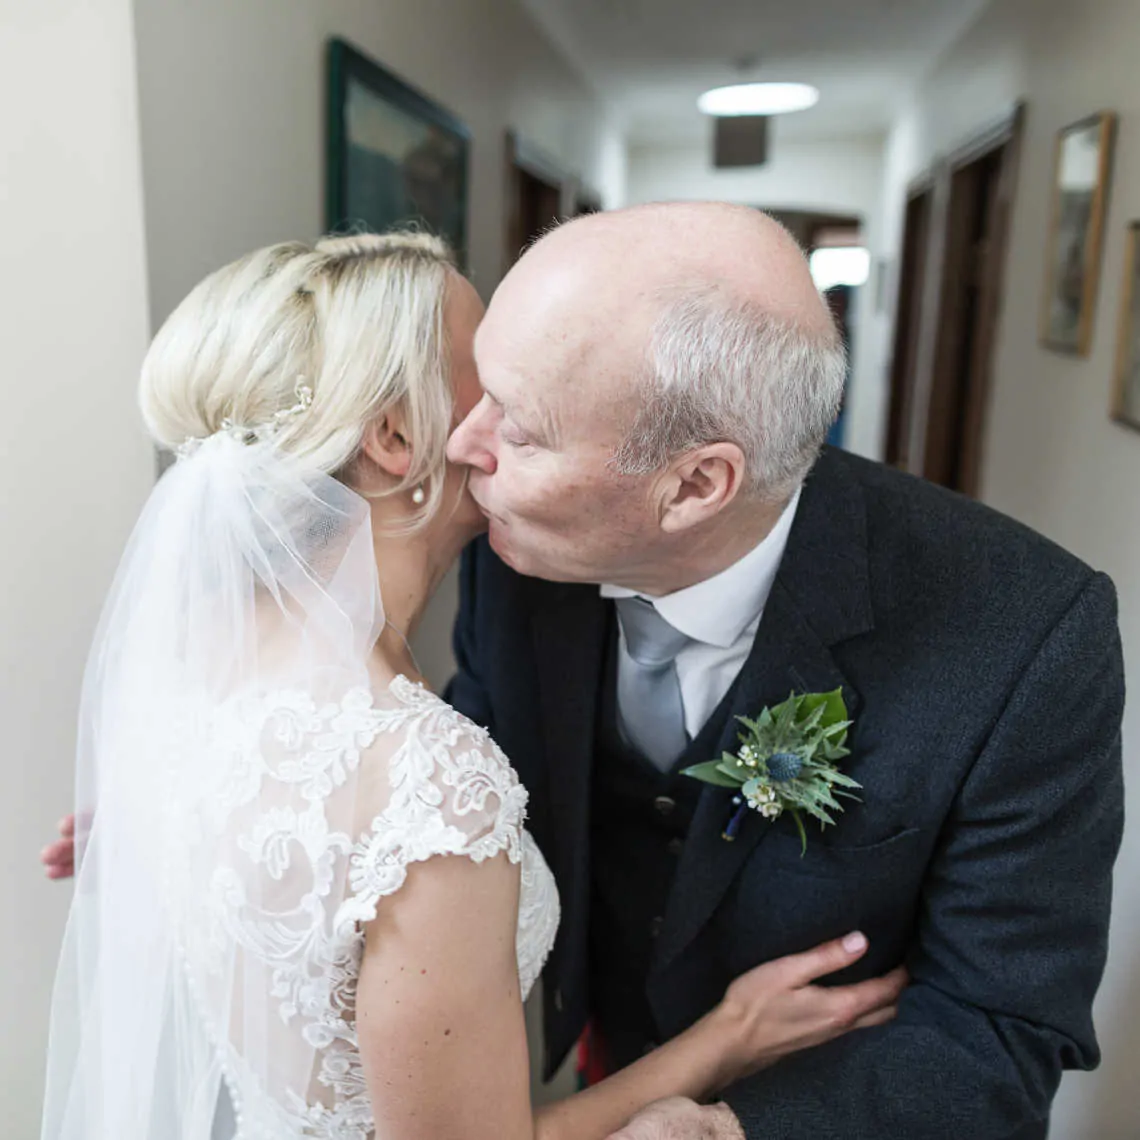 Father of the bride kissing the bride on her cheek